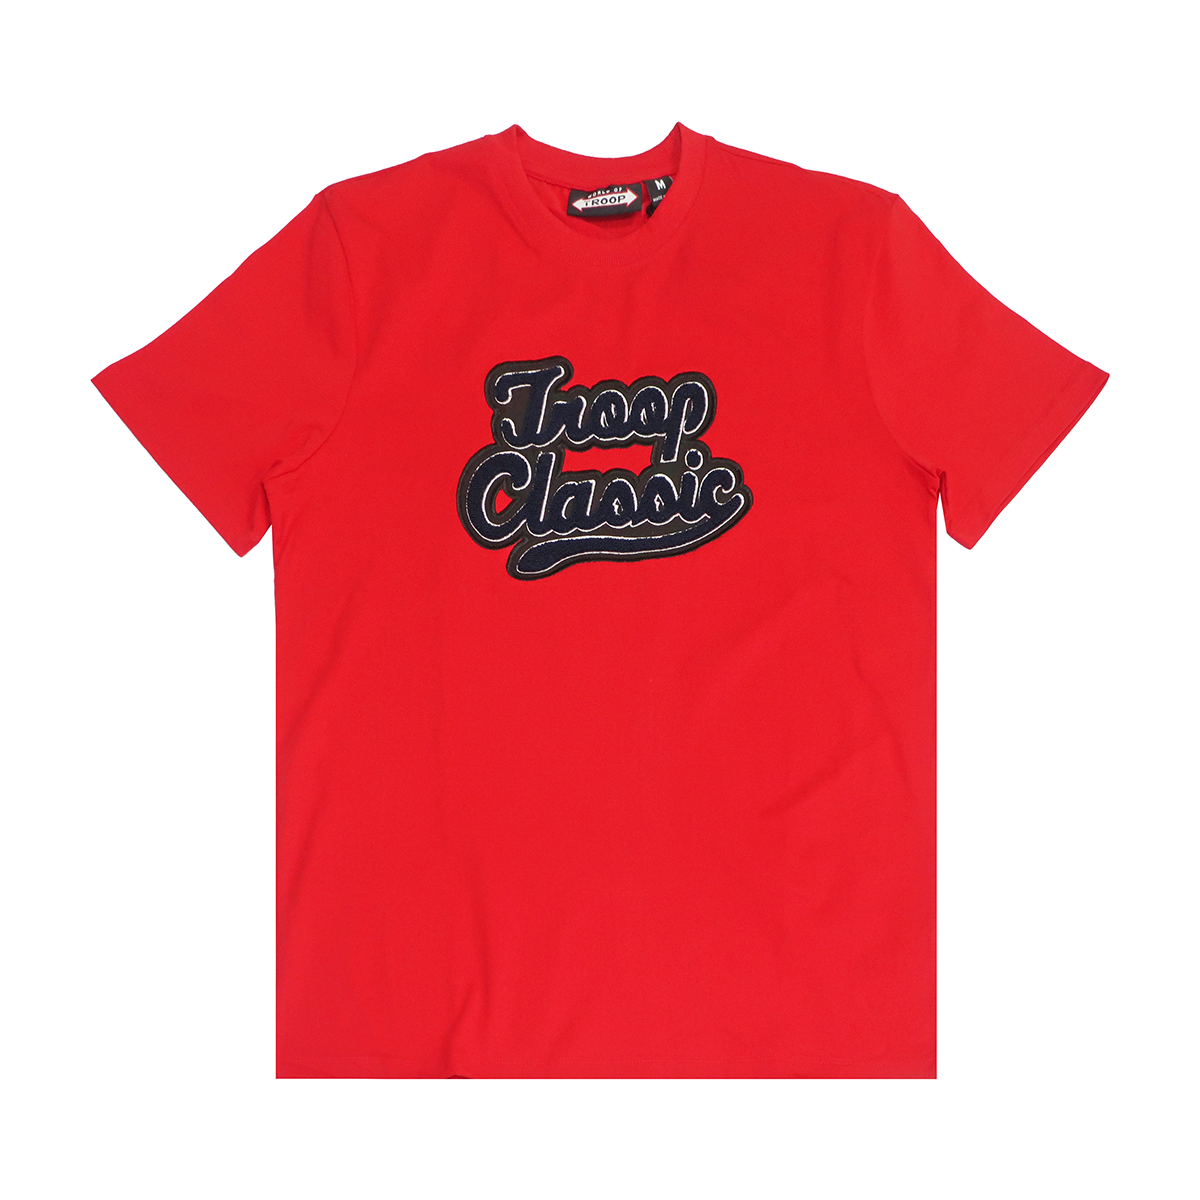 TROOP CLASSIC T-SHIRT RED - TP913978